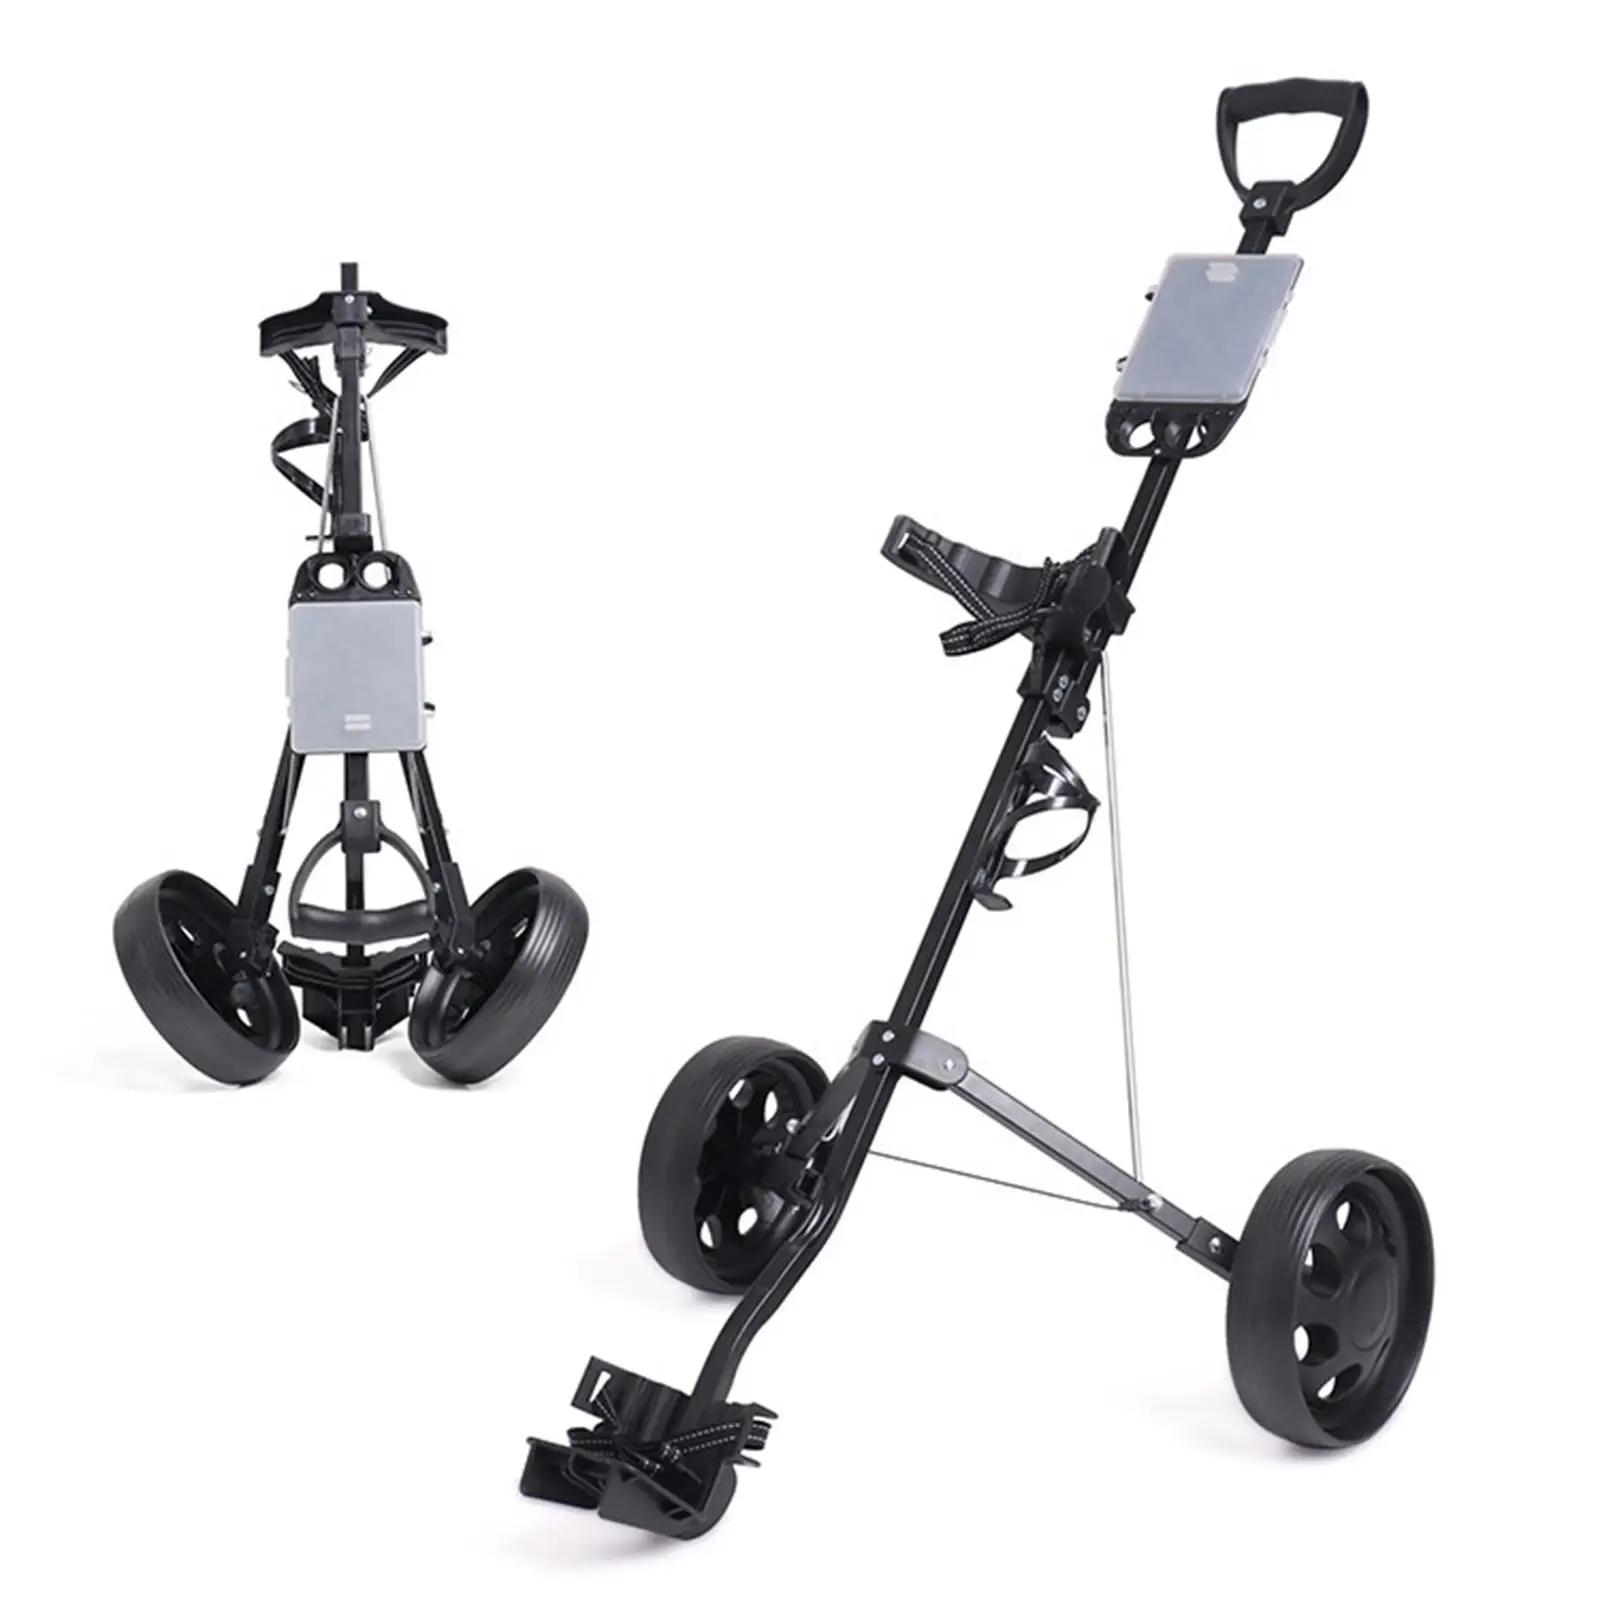 Folding Golf Pull Cart 2 Wheel Portable Walking Cart Adjustable Handle Angle Easy to Carry Golf Trolley for Golf Game Kids